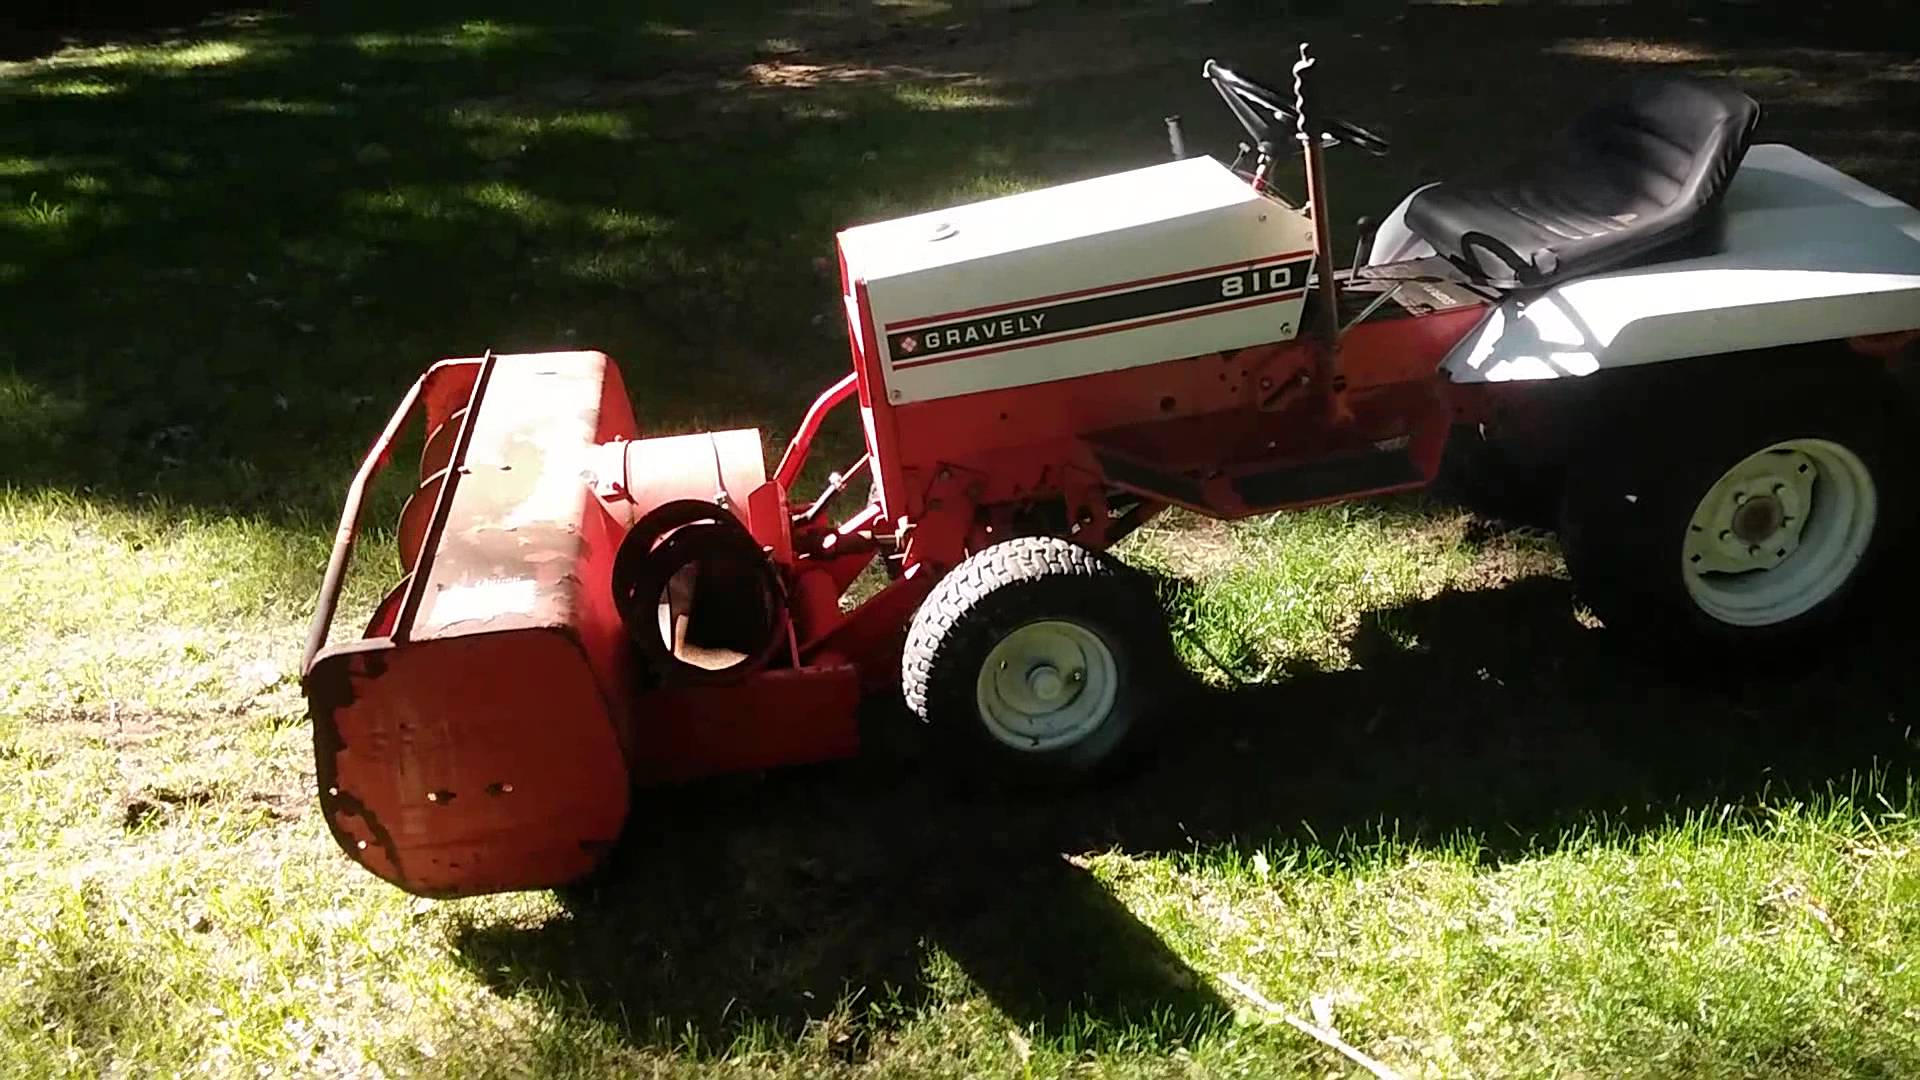 Gravely 810 with snowblower - YouTube